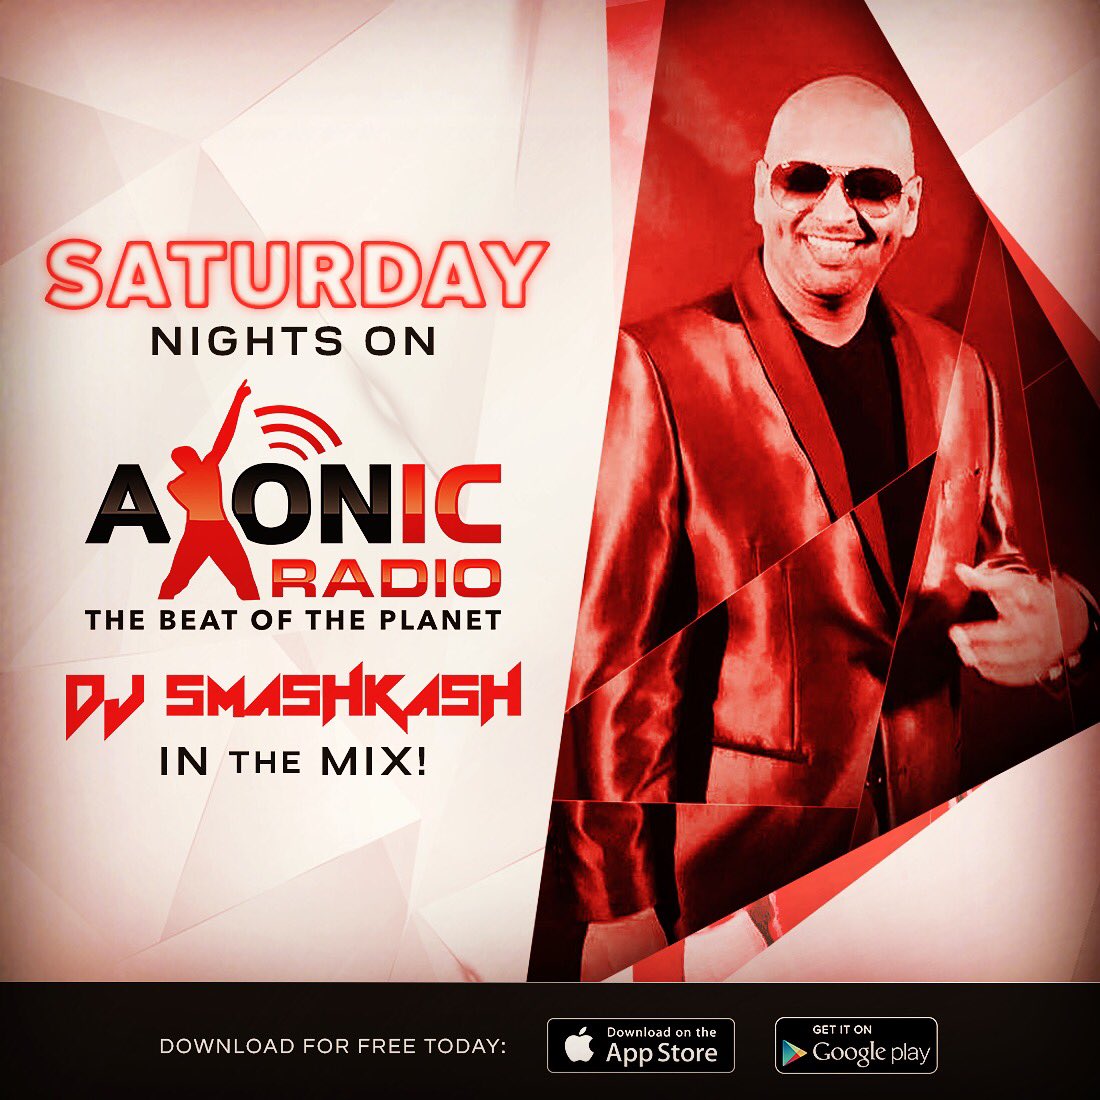 Let's go!!! Saturday Nights on @akonicradio with @djsmashkash Download the app and listen anywhere around the world https://t.co/qoejjiHdly